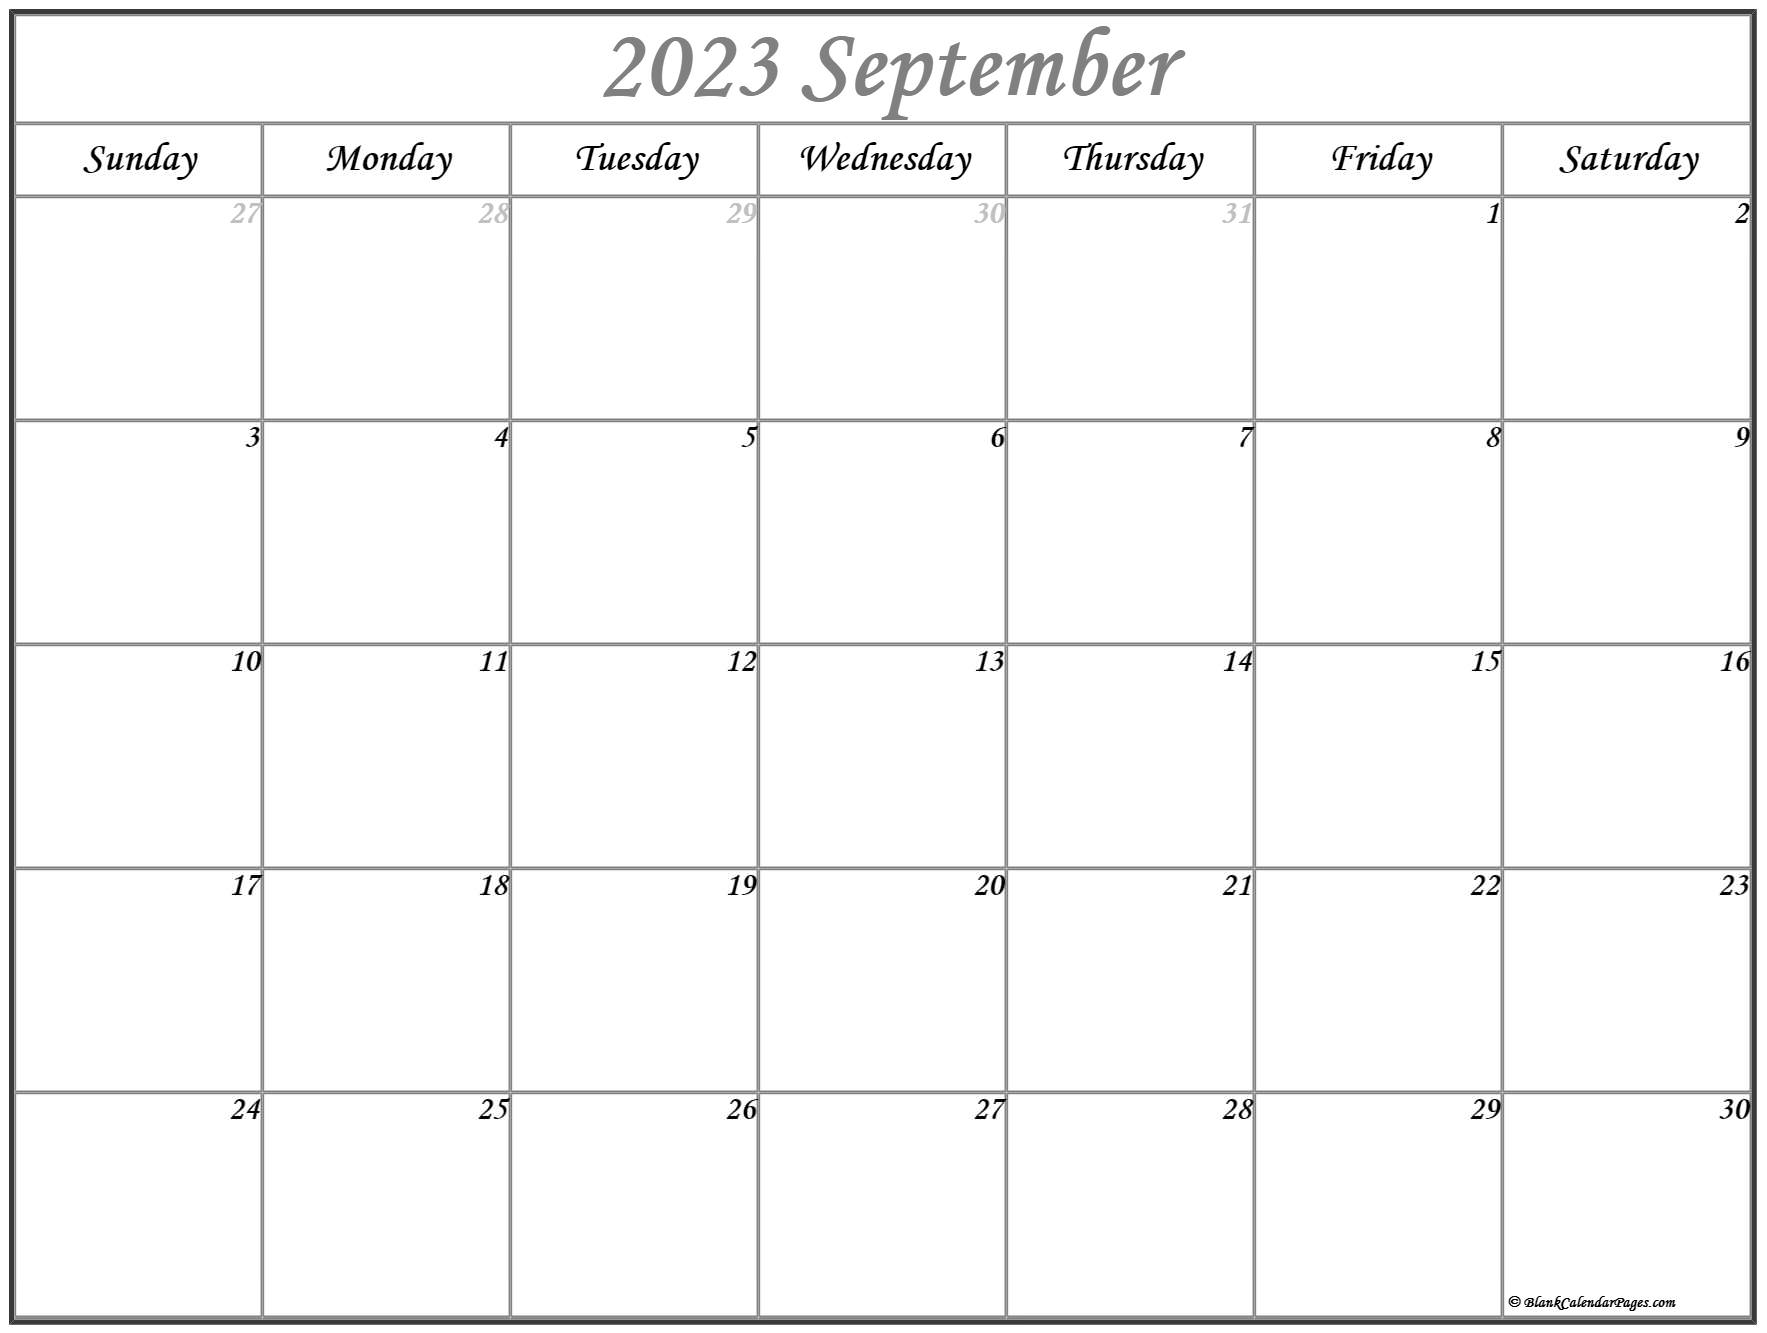 show-me-the-calendar-for-the-month-of-september-2023-cool-awasome-list-of-seaside-calendar-of